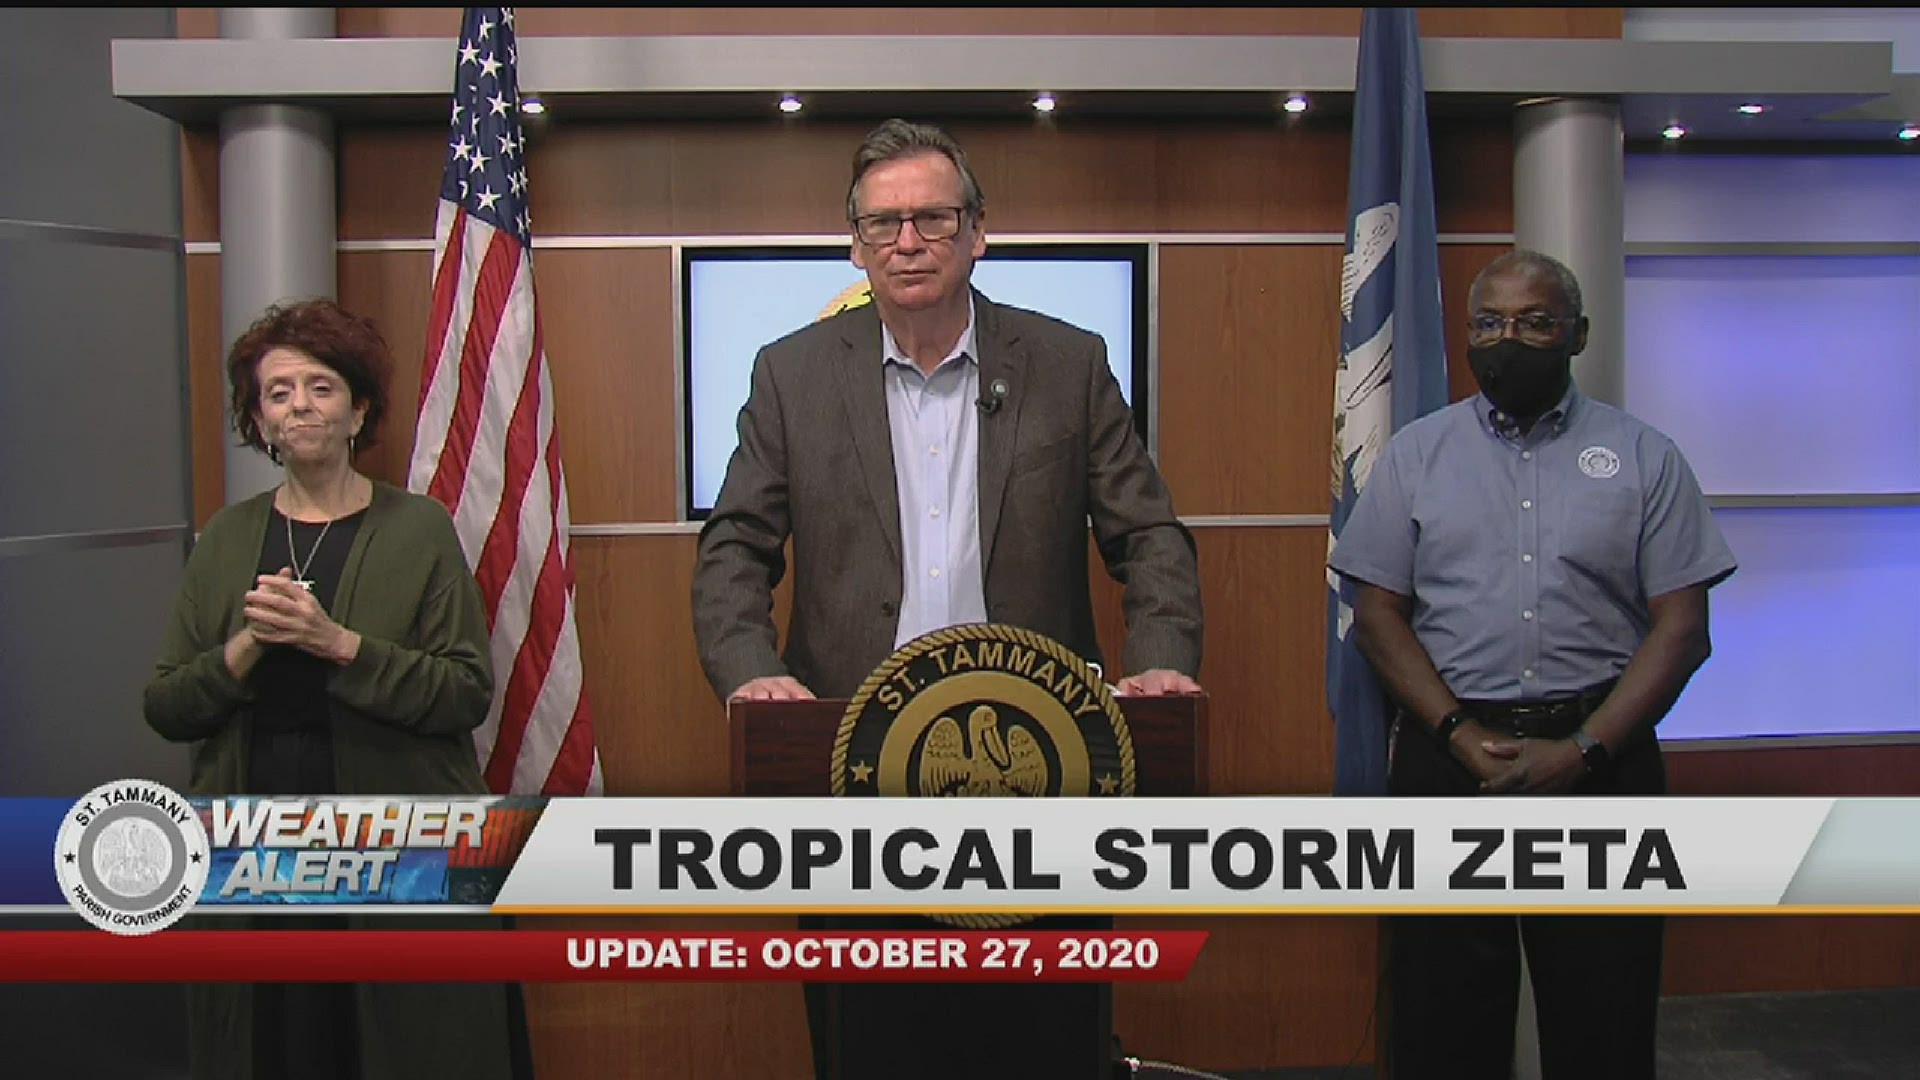 Parish President Mike Cooper lays out St. Tammany's preparations for Hurricane Zeta.